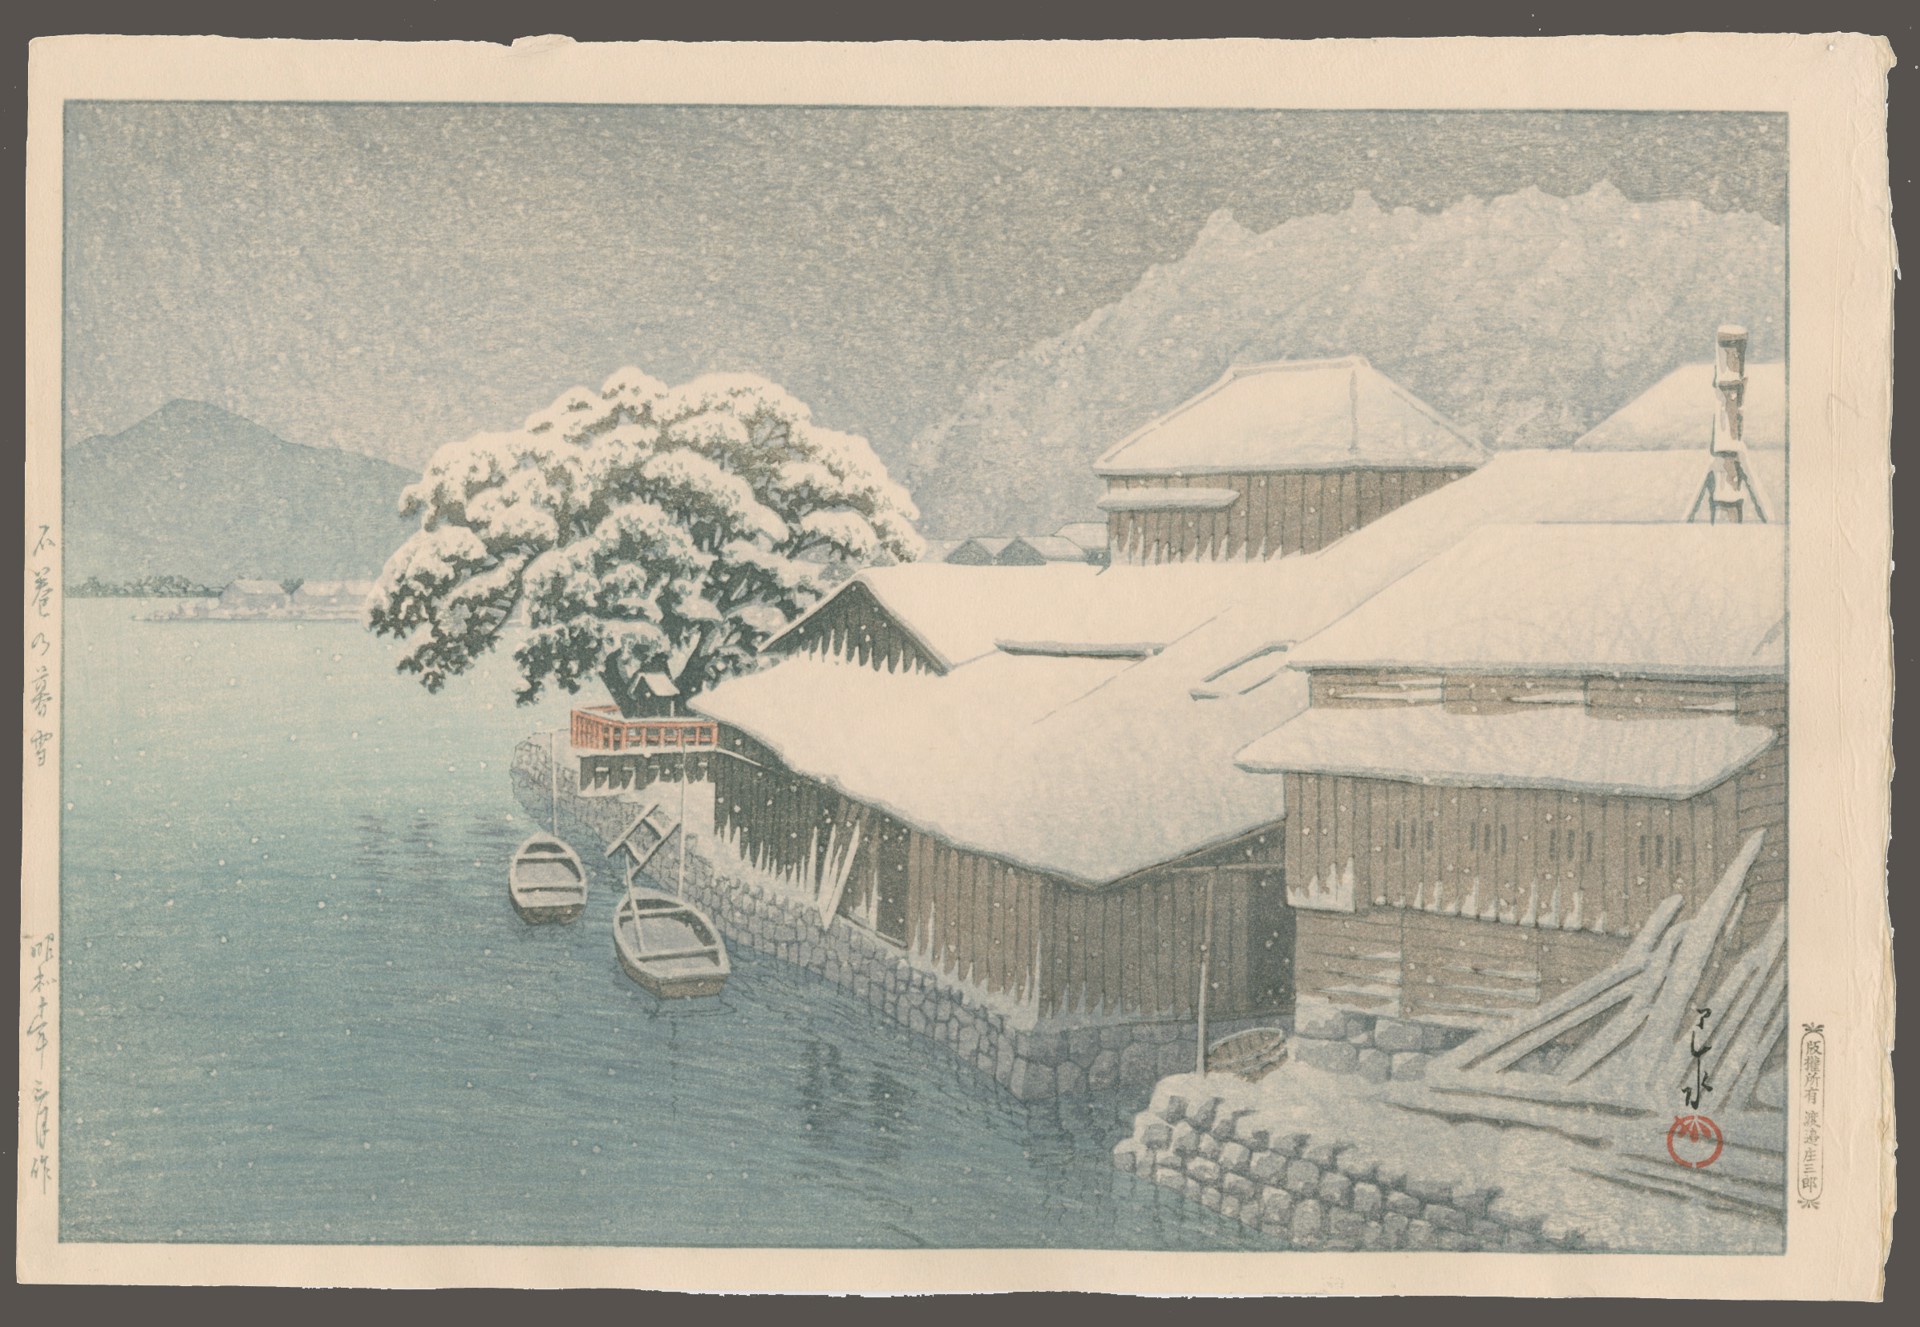 Evening Snow at Ishinomaki Collected Views of Eastern Japan by Hasui